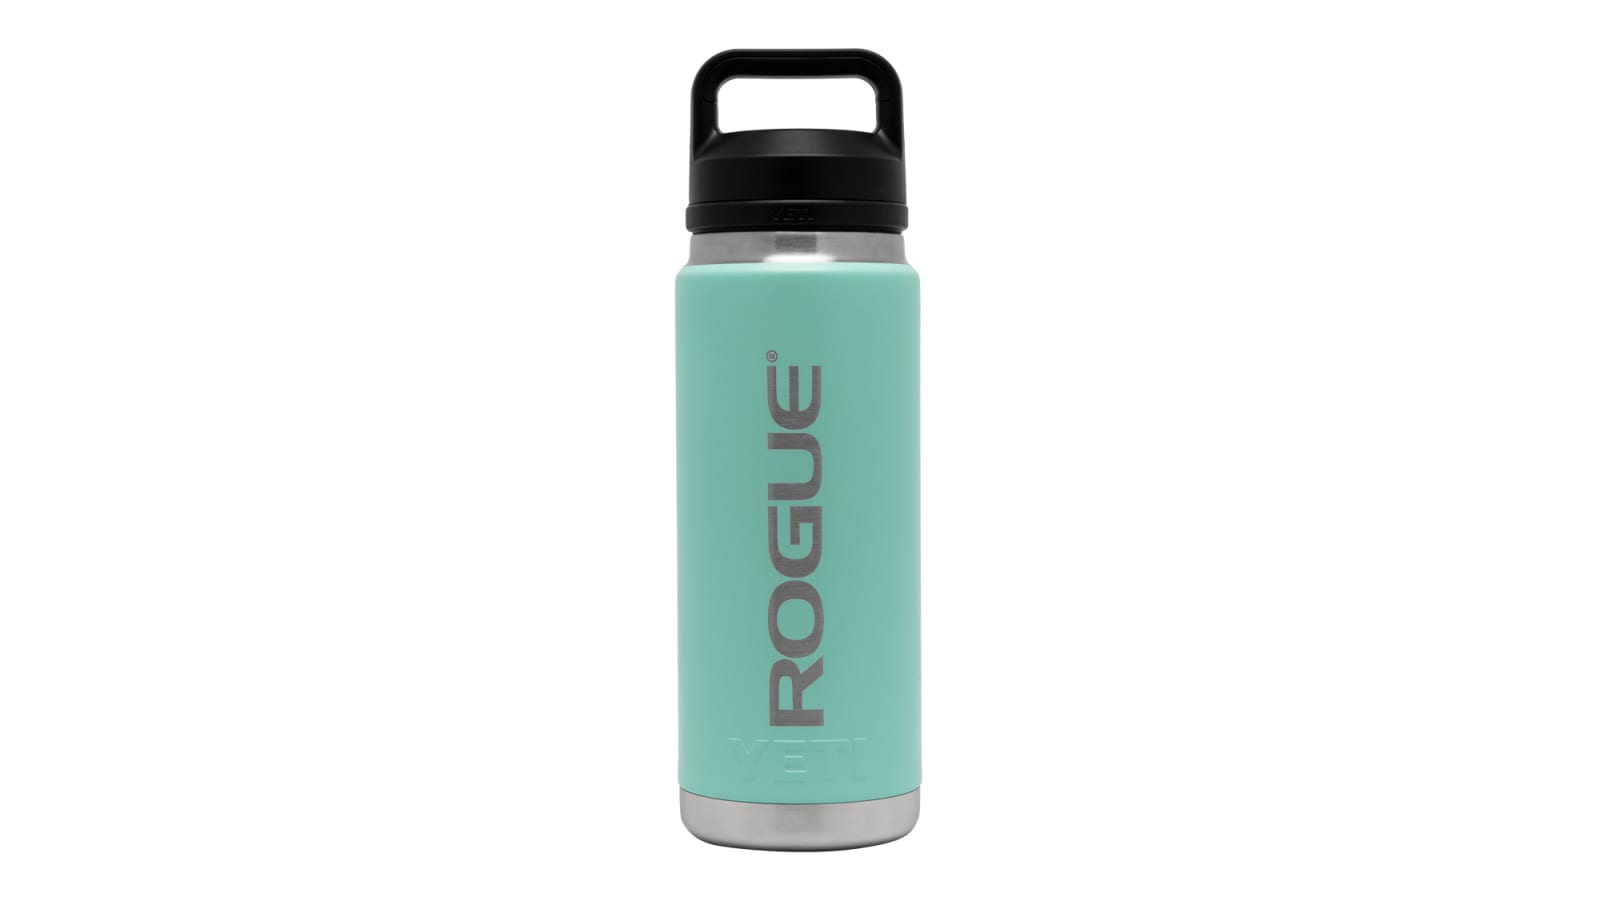 https://assets.roguefitness.com/f_auto,q_auto,c_limit,w_1600,b_rgb:ffffff/catalog/Gear%20and%20Accessories/Accessories/Shakers%20and%20Bottles/YT0054/YT0054-H_lhglam.png